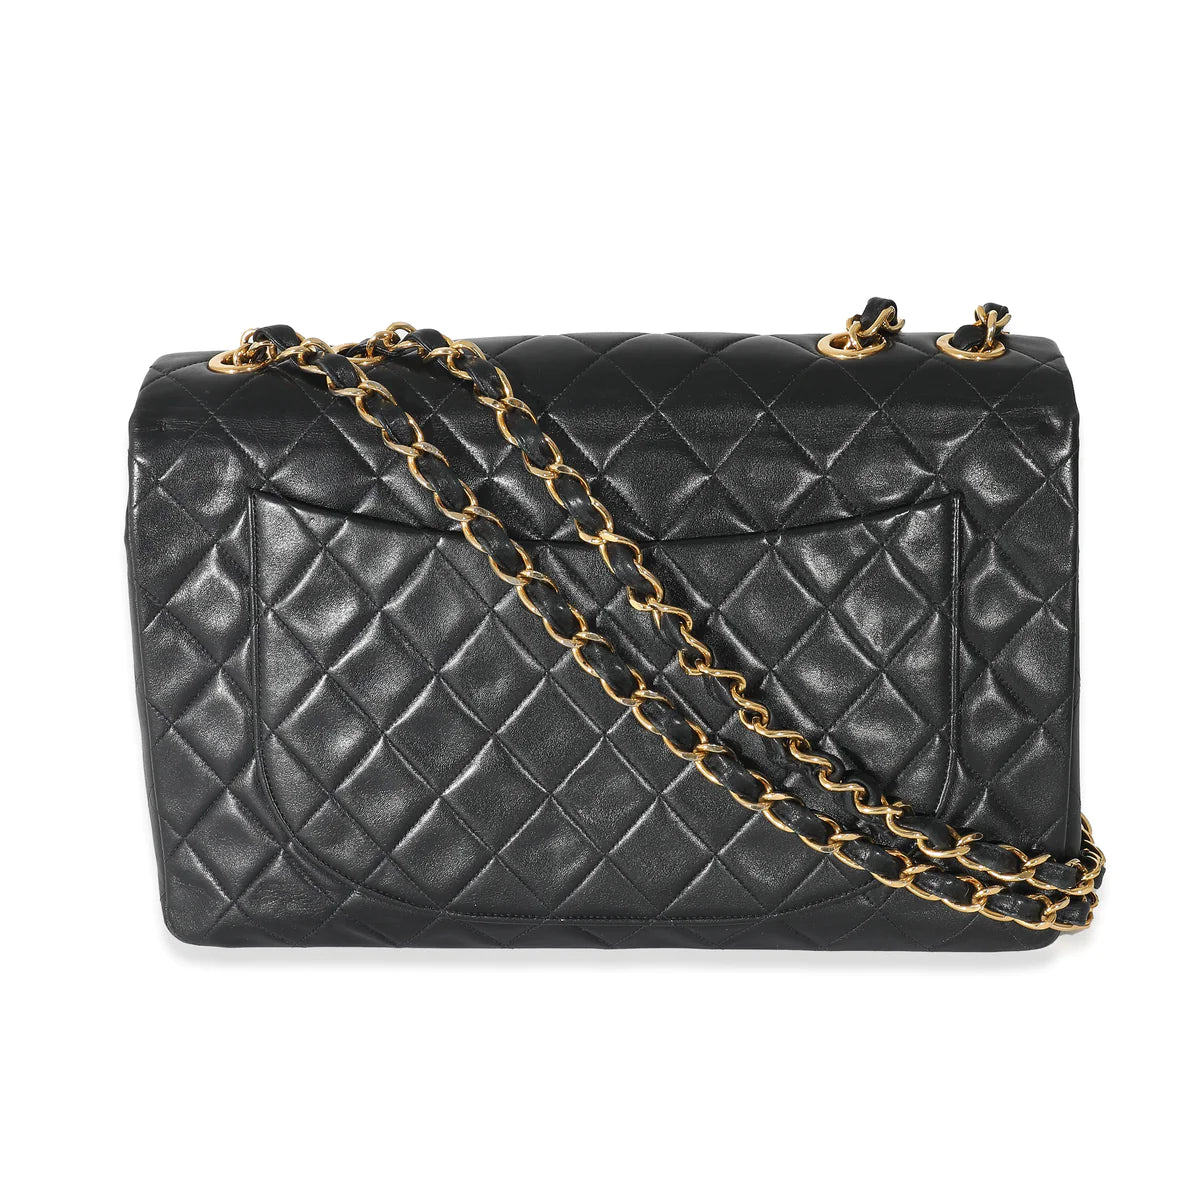 CHANEL - Vintage Black Quilted Lambskin XL Single Flap Bag